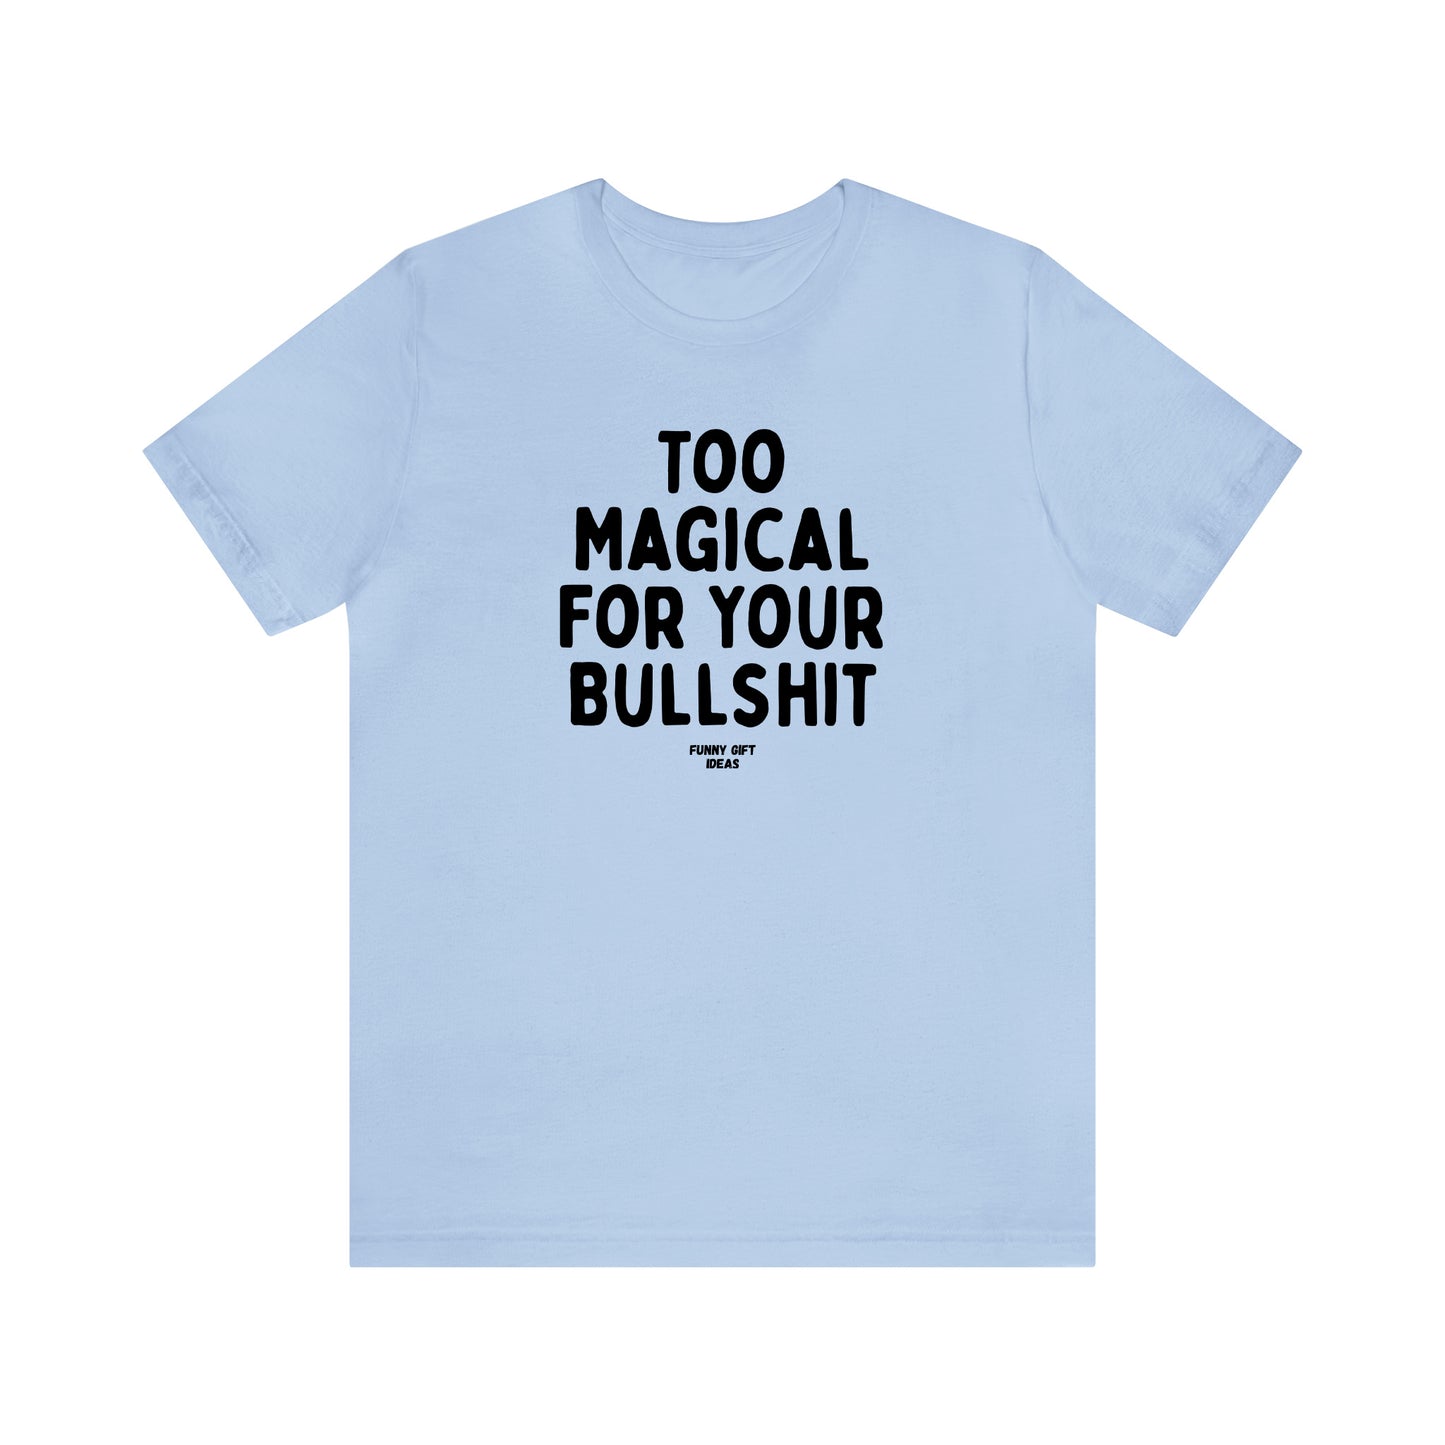 Funny Shirts for Women - Too Magical for Your Bullshit - Women's T Shirts